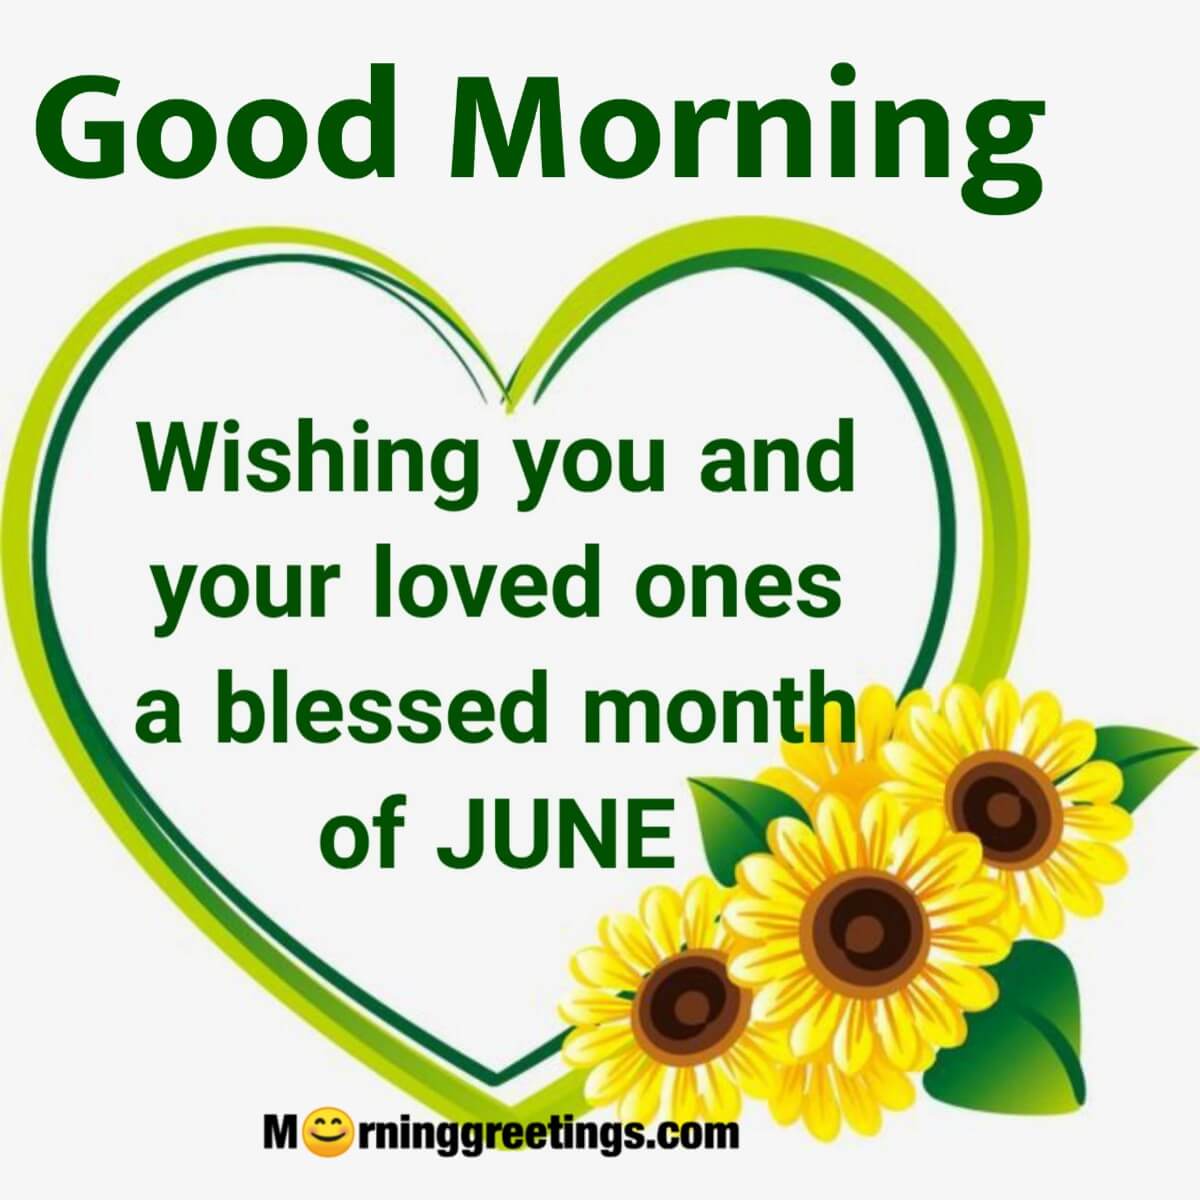 Good Morning Wishing You Blessed June